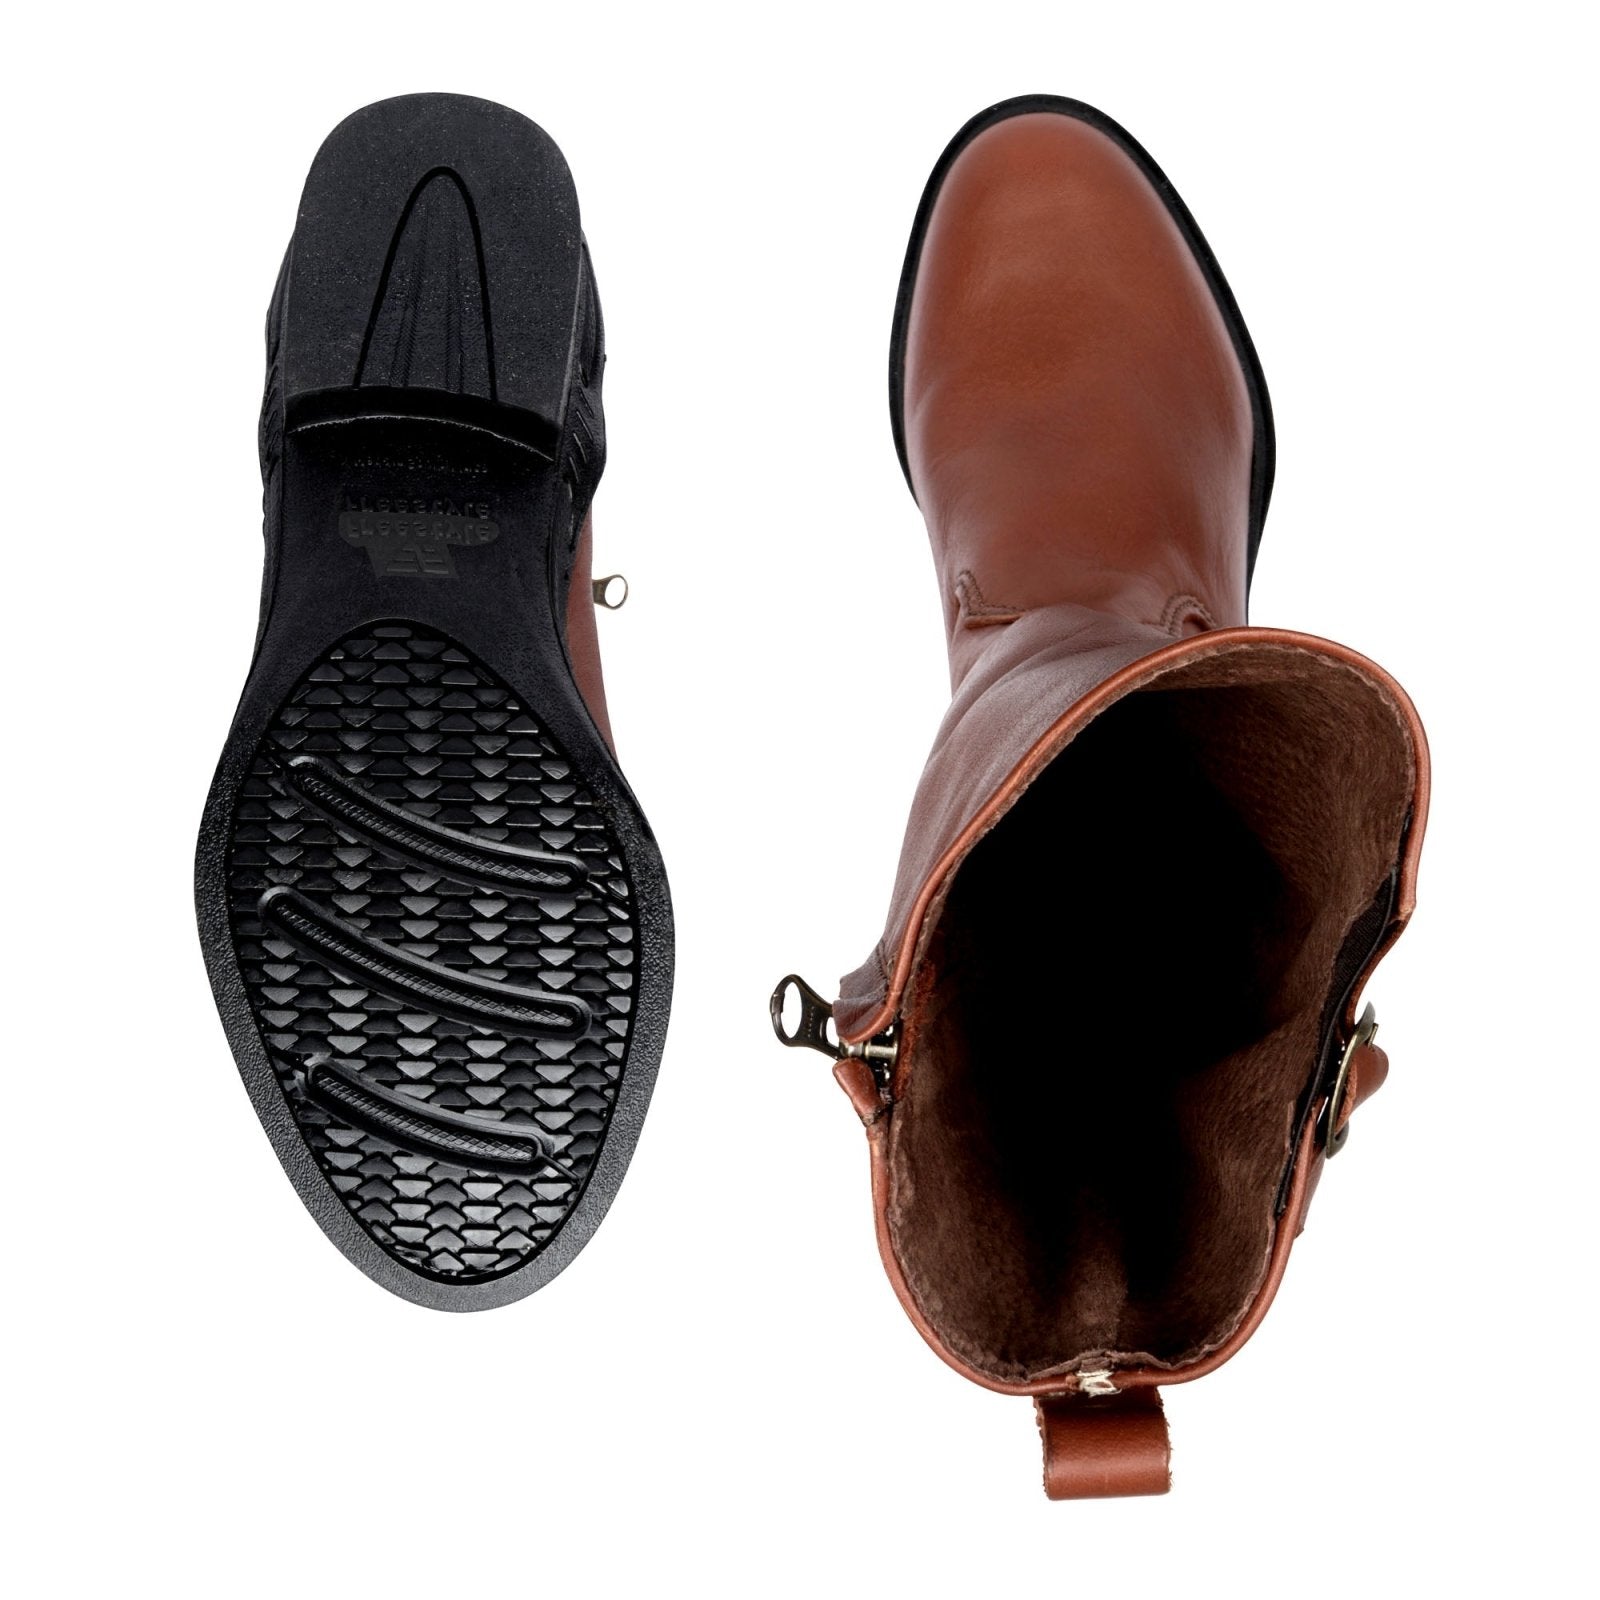 Tarry Premium Water Resistant Leather Boot - Freestyle SA Proudly local leather boots veldskoens vellies leather shoes suede veldskoens